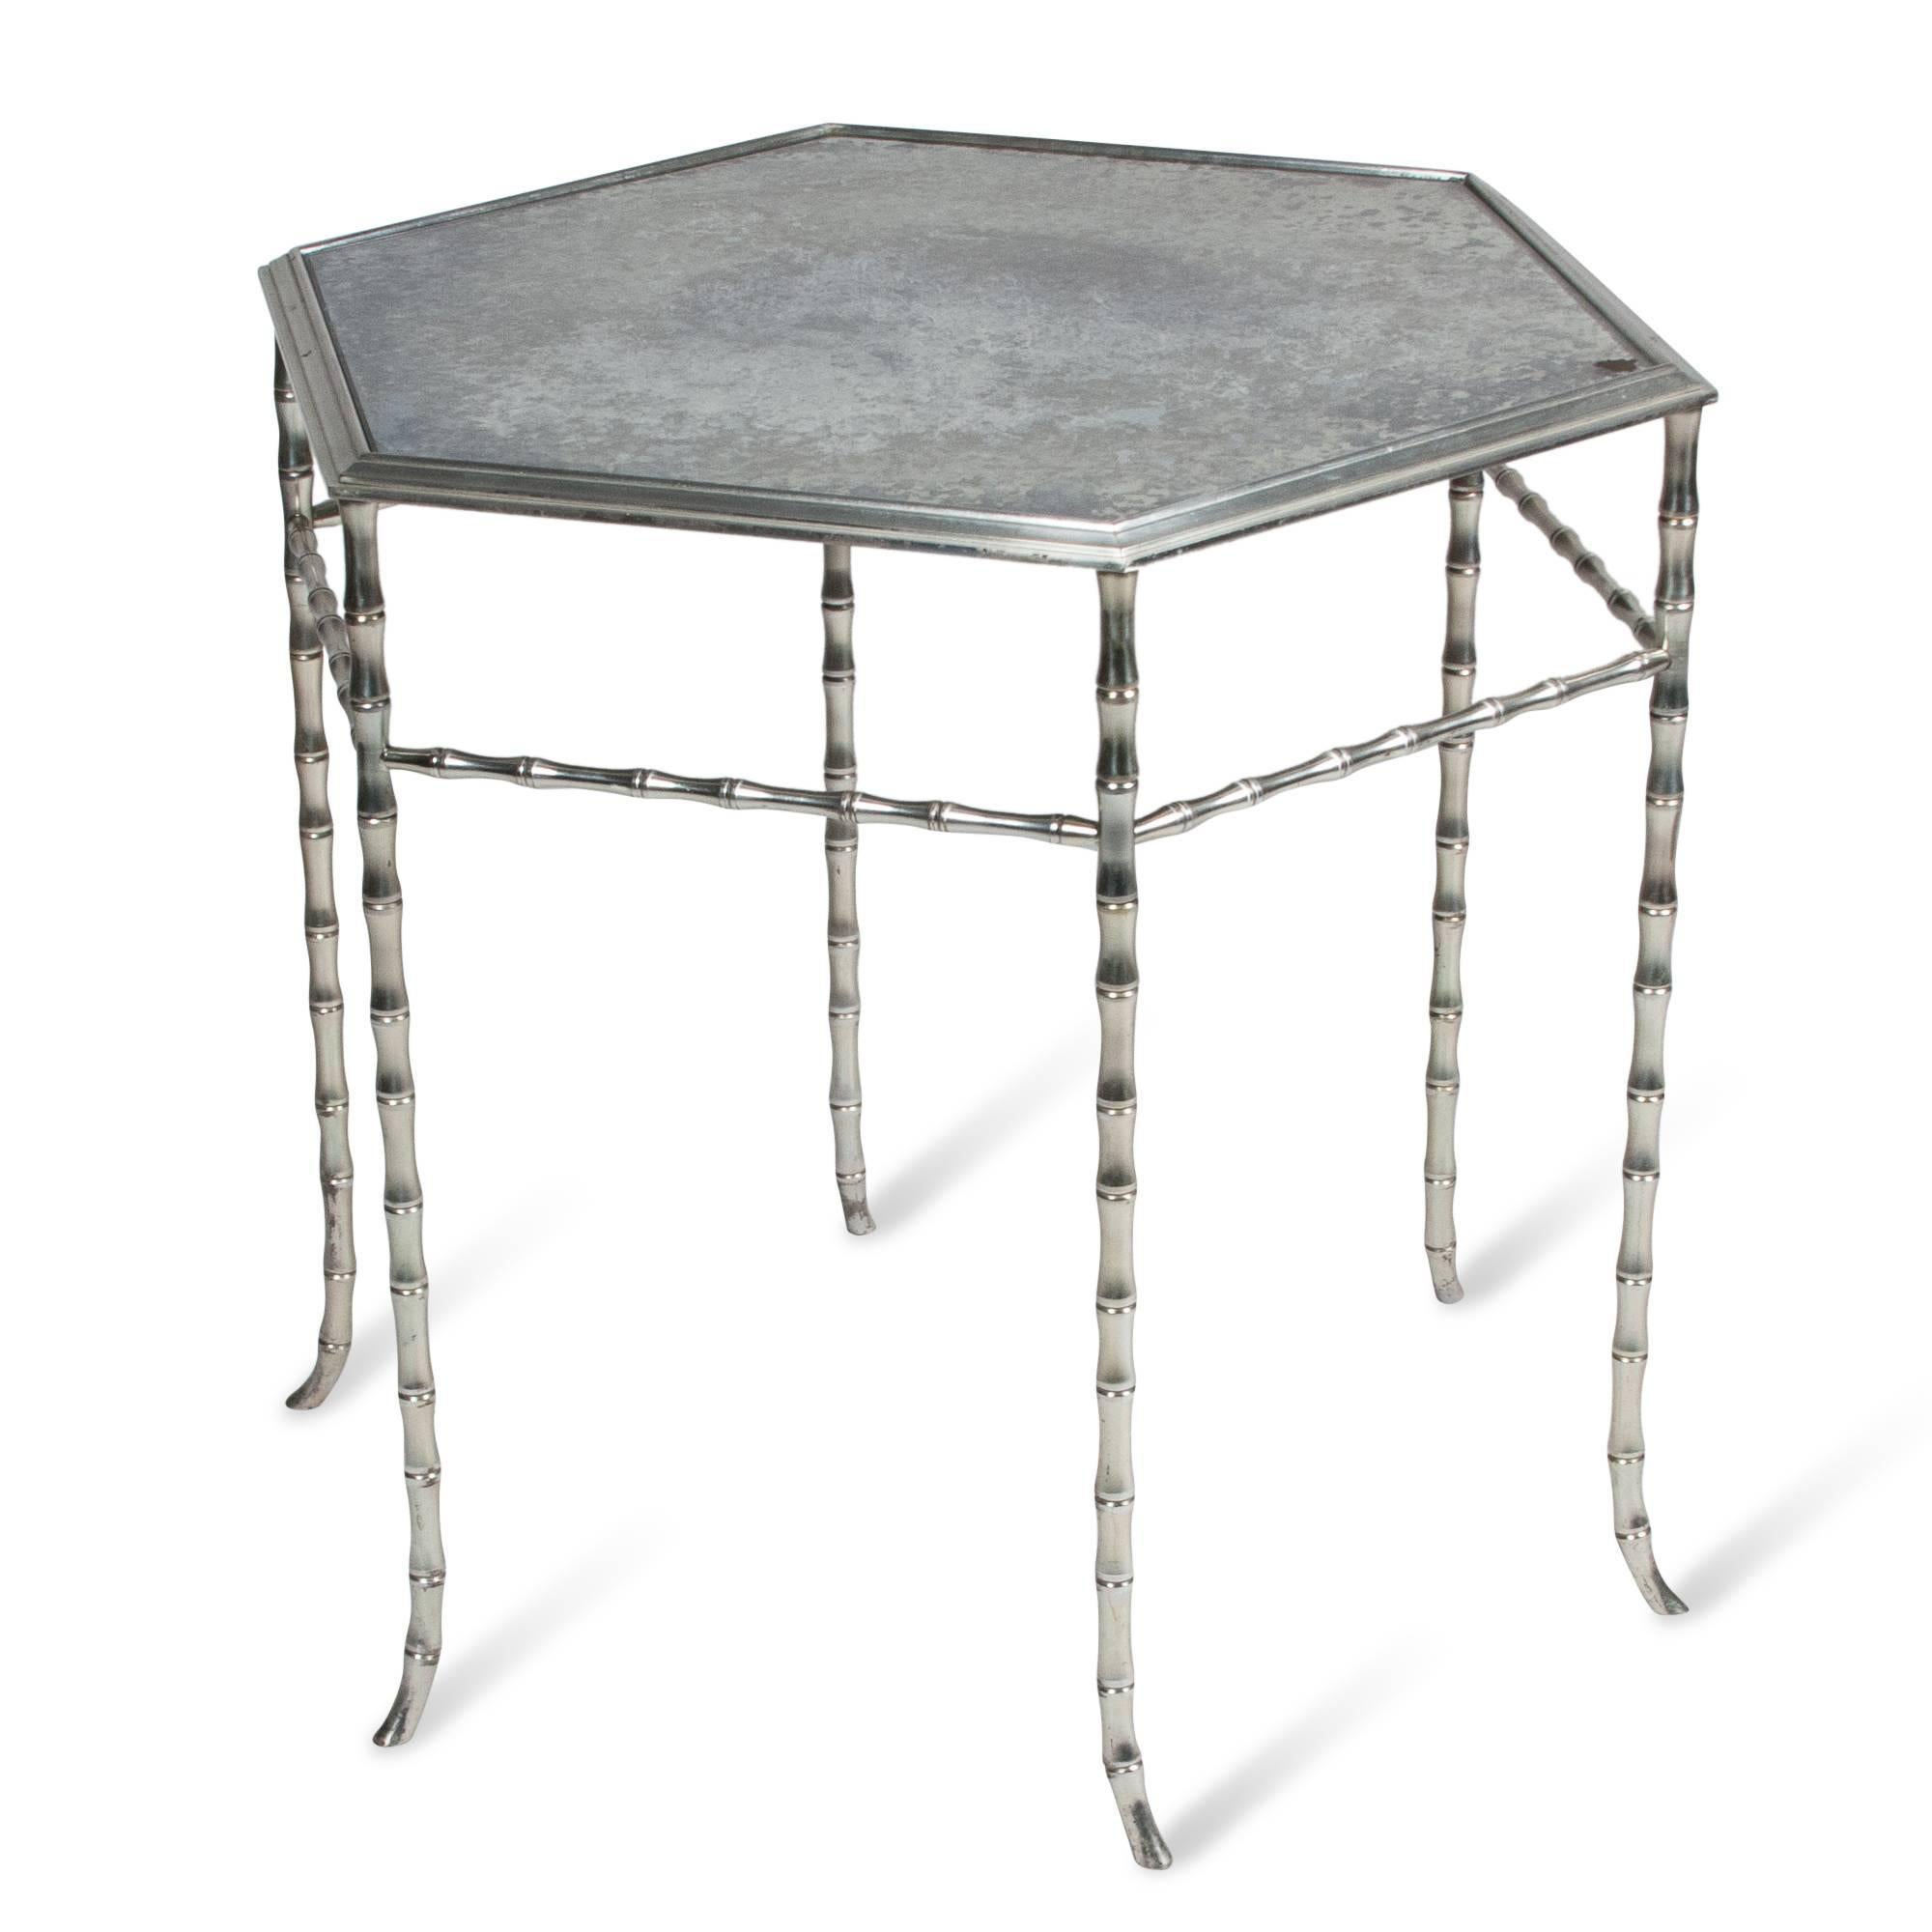 Chrome frame hexagonal shaped table, bamboo-style legs, antiqued mirrored glass top, by Bagues, France, 1960s. Measures: Width 21 1/2 in, height 21 1/2 in. Distance from point to point of hexagon 24 1/2 in.